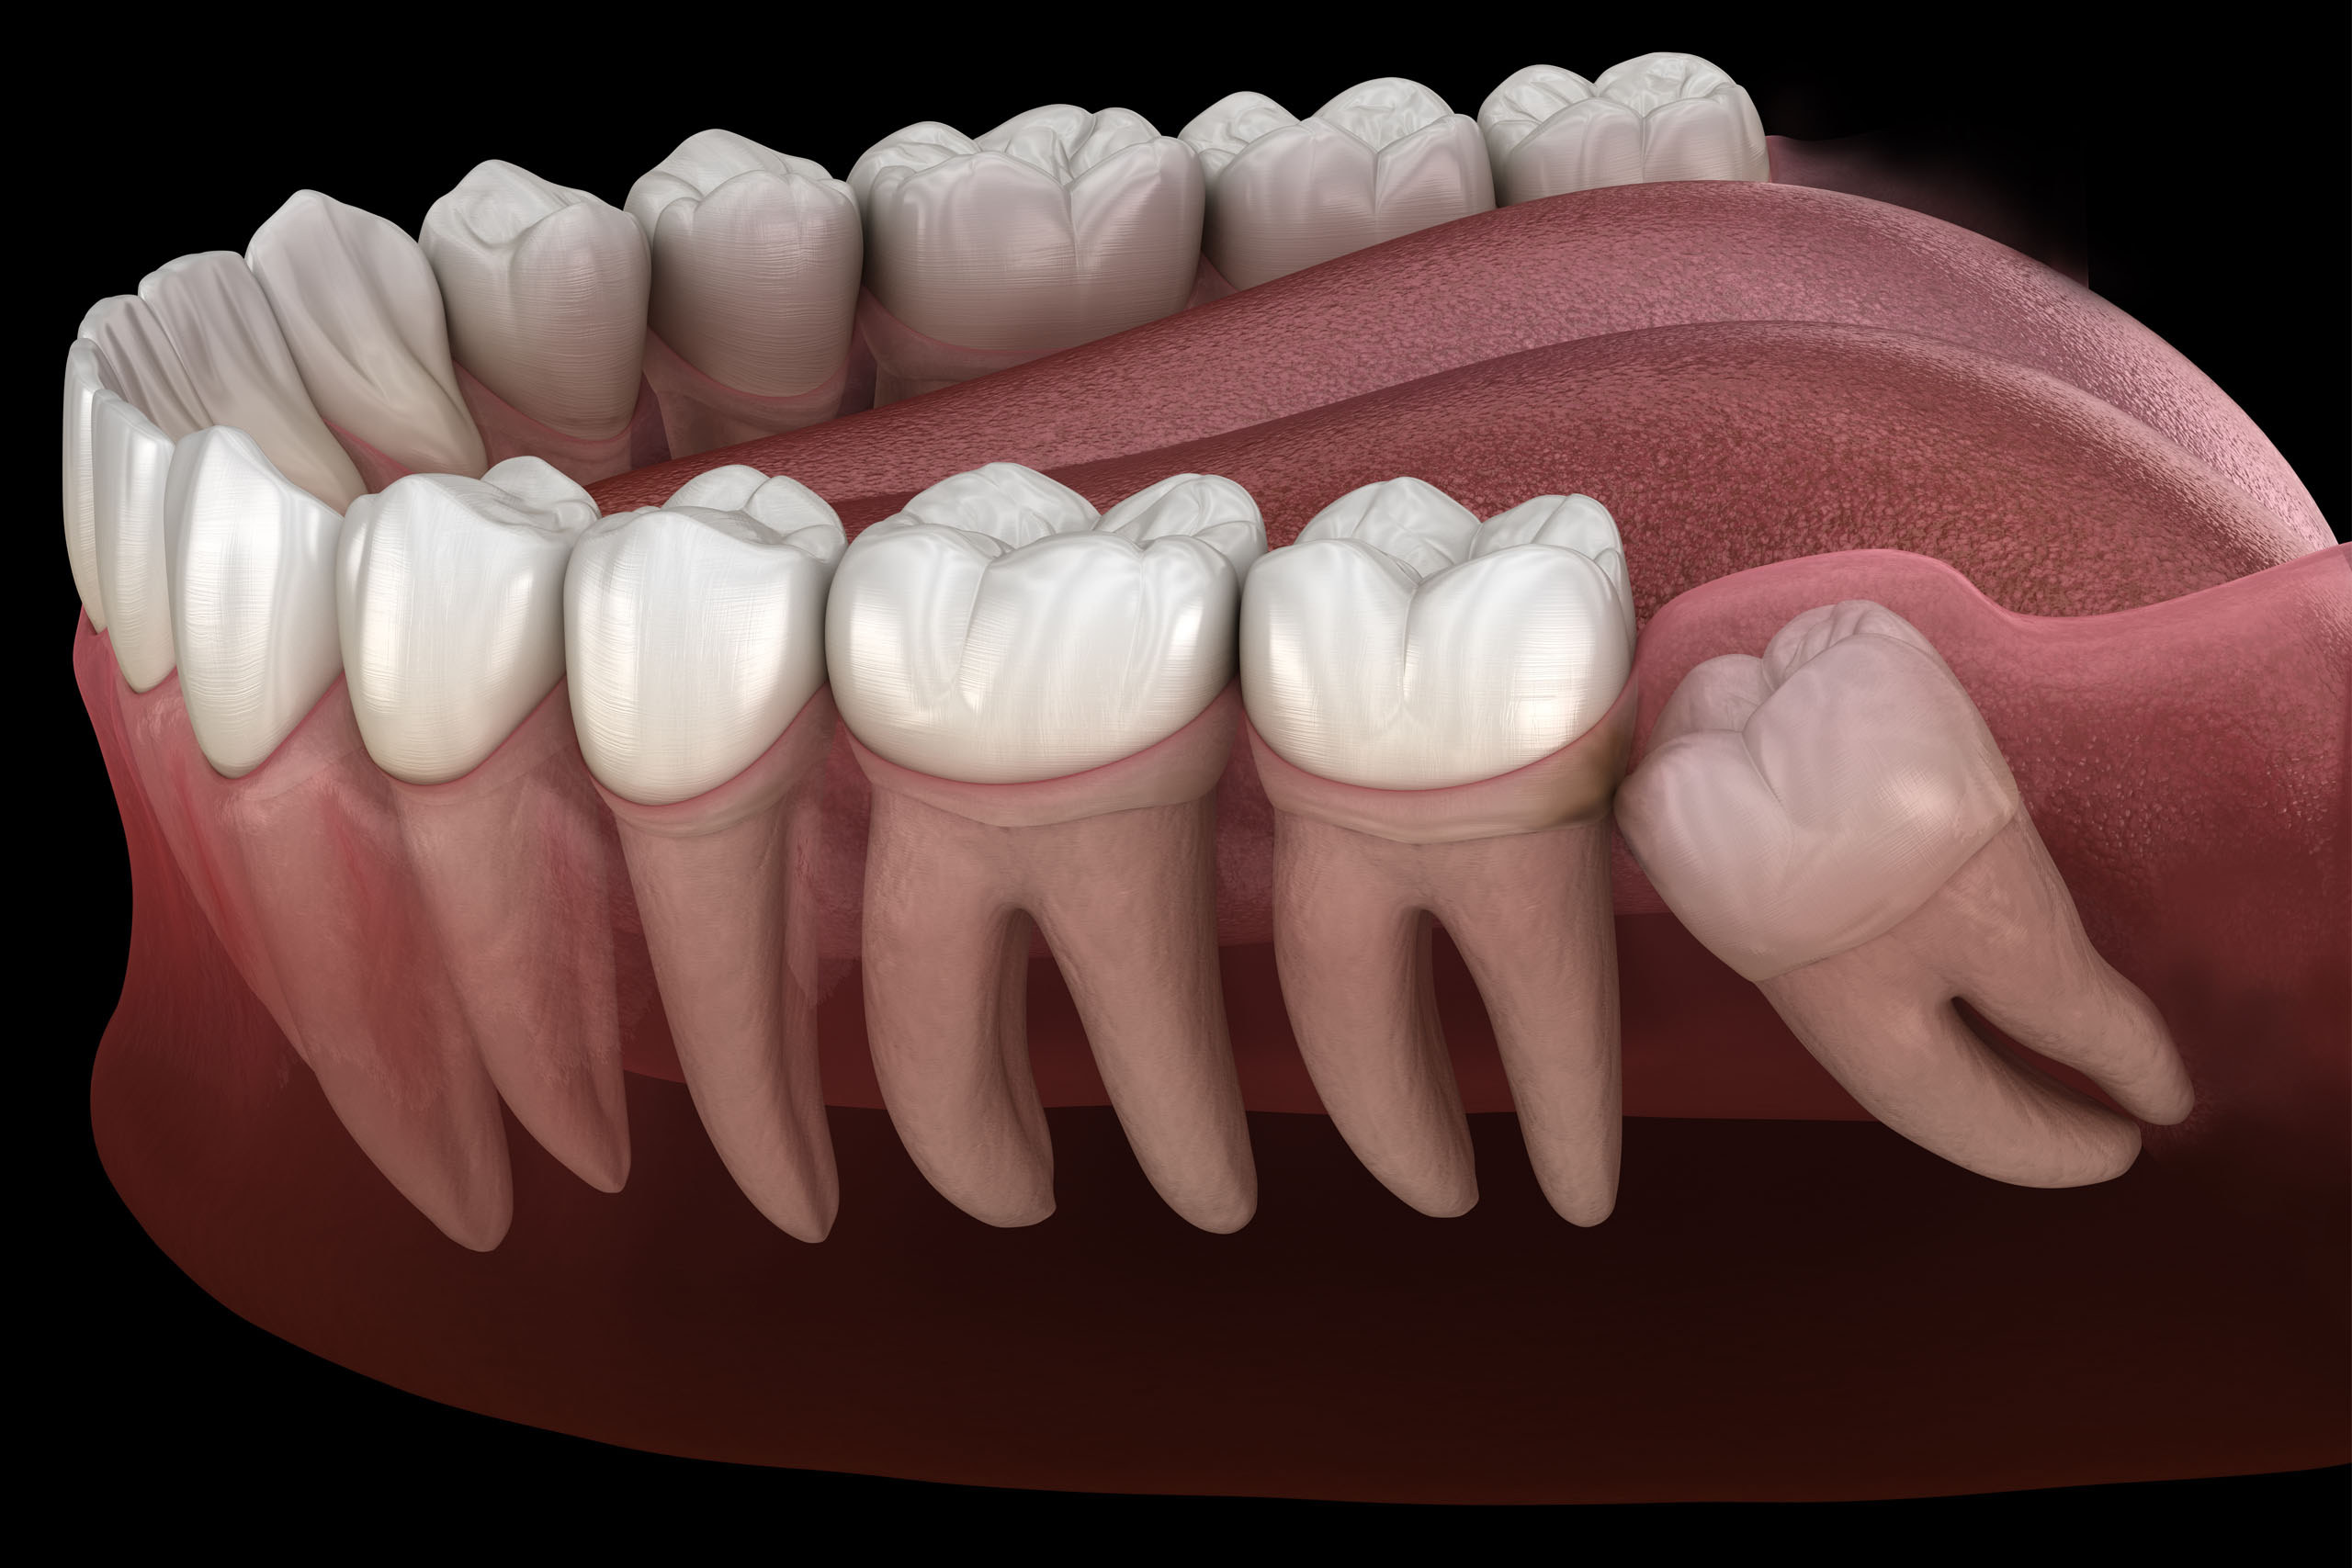 A computer rendering of wisdom teeth in the mouth